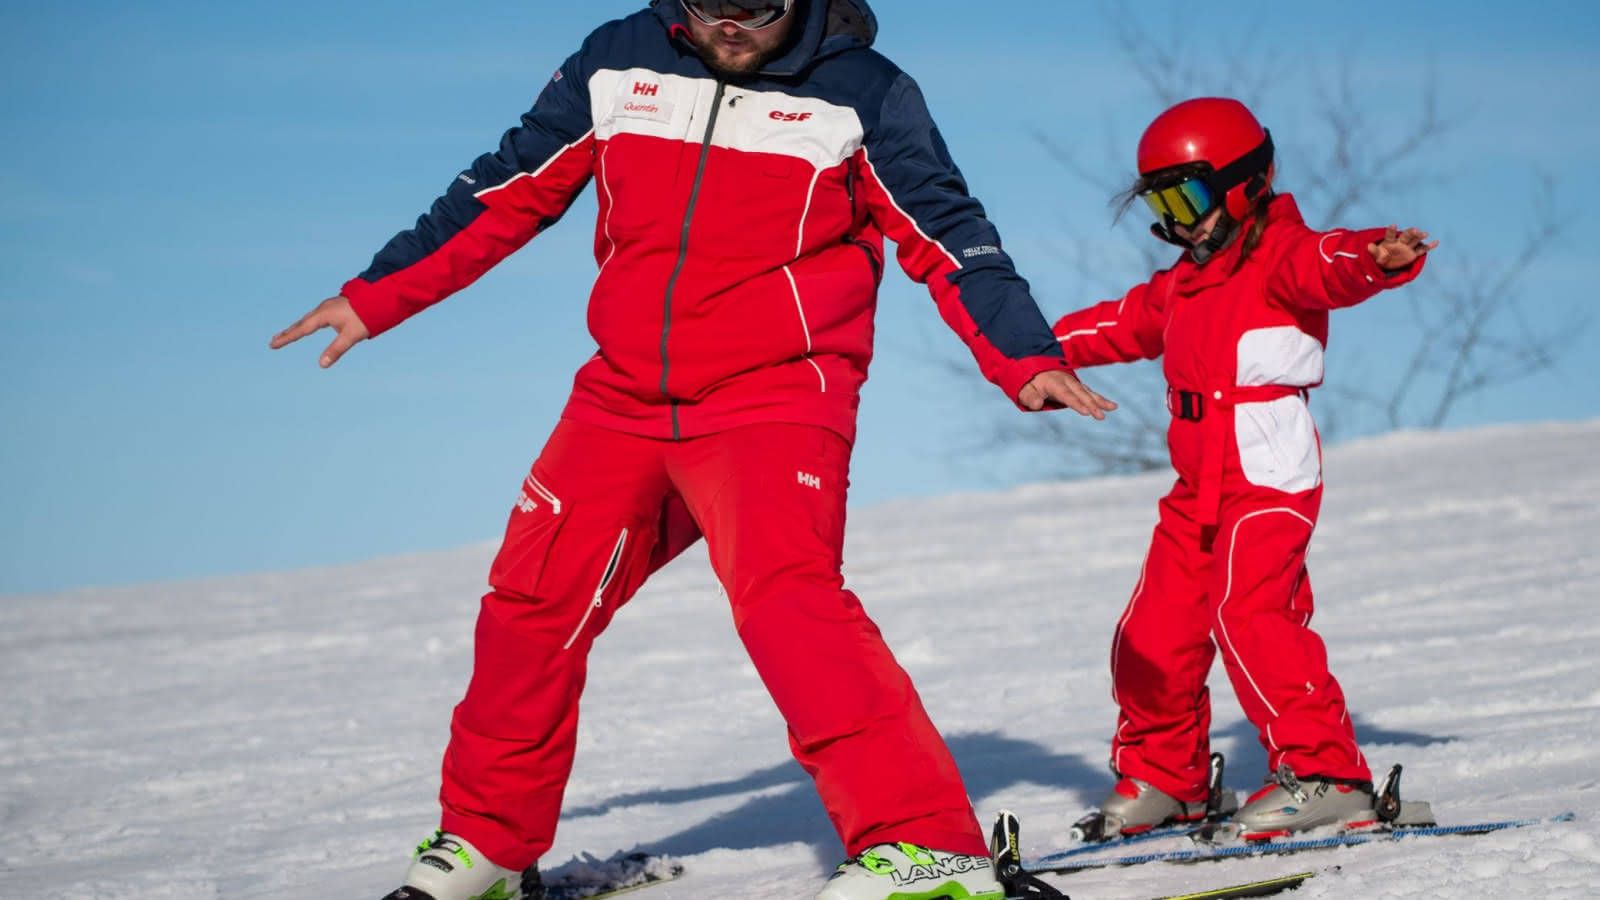 instructor and pupil on skis, red skiing suits